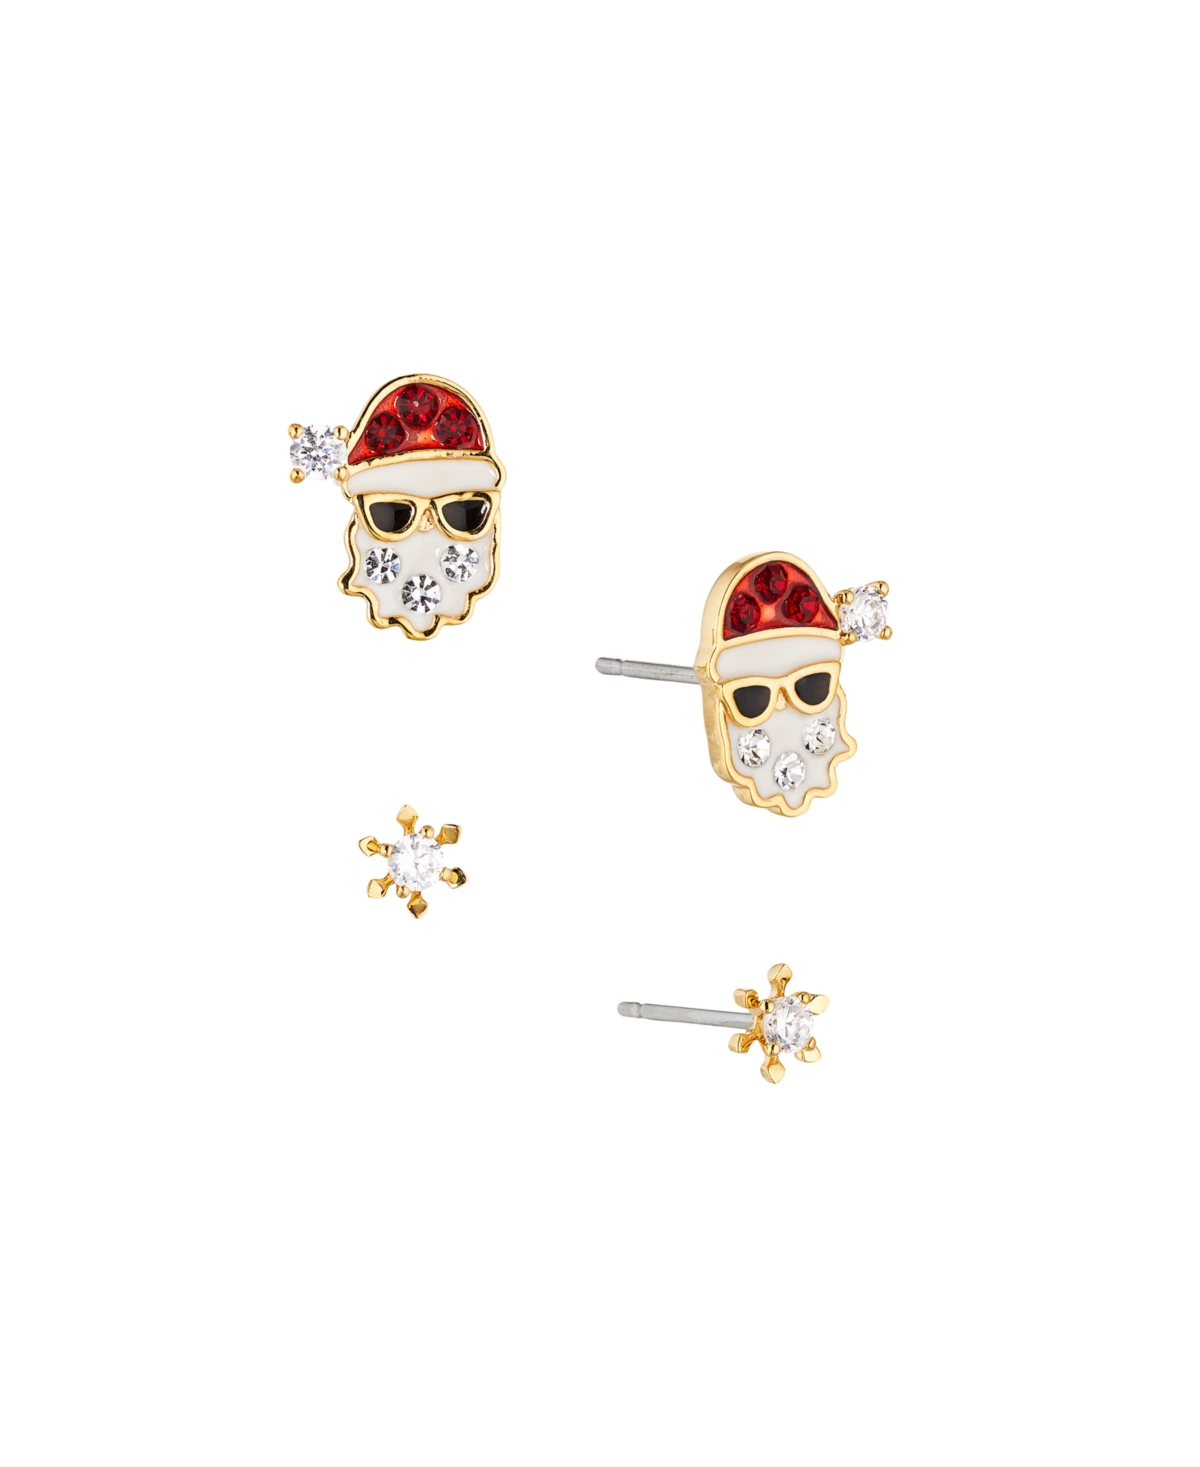 Santa Stud and Snowflake Stud Earring in 18K Gold Plated Set, 4 Pieces - K Gold Plated